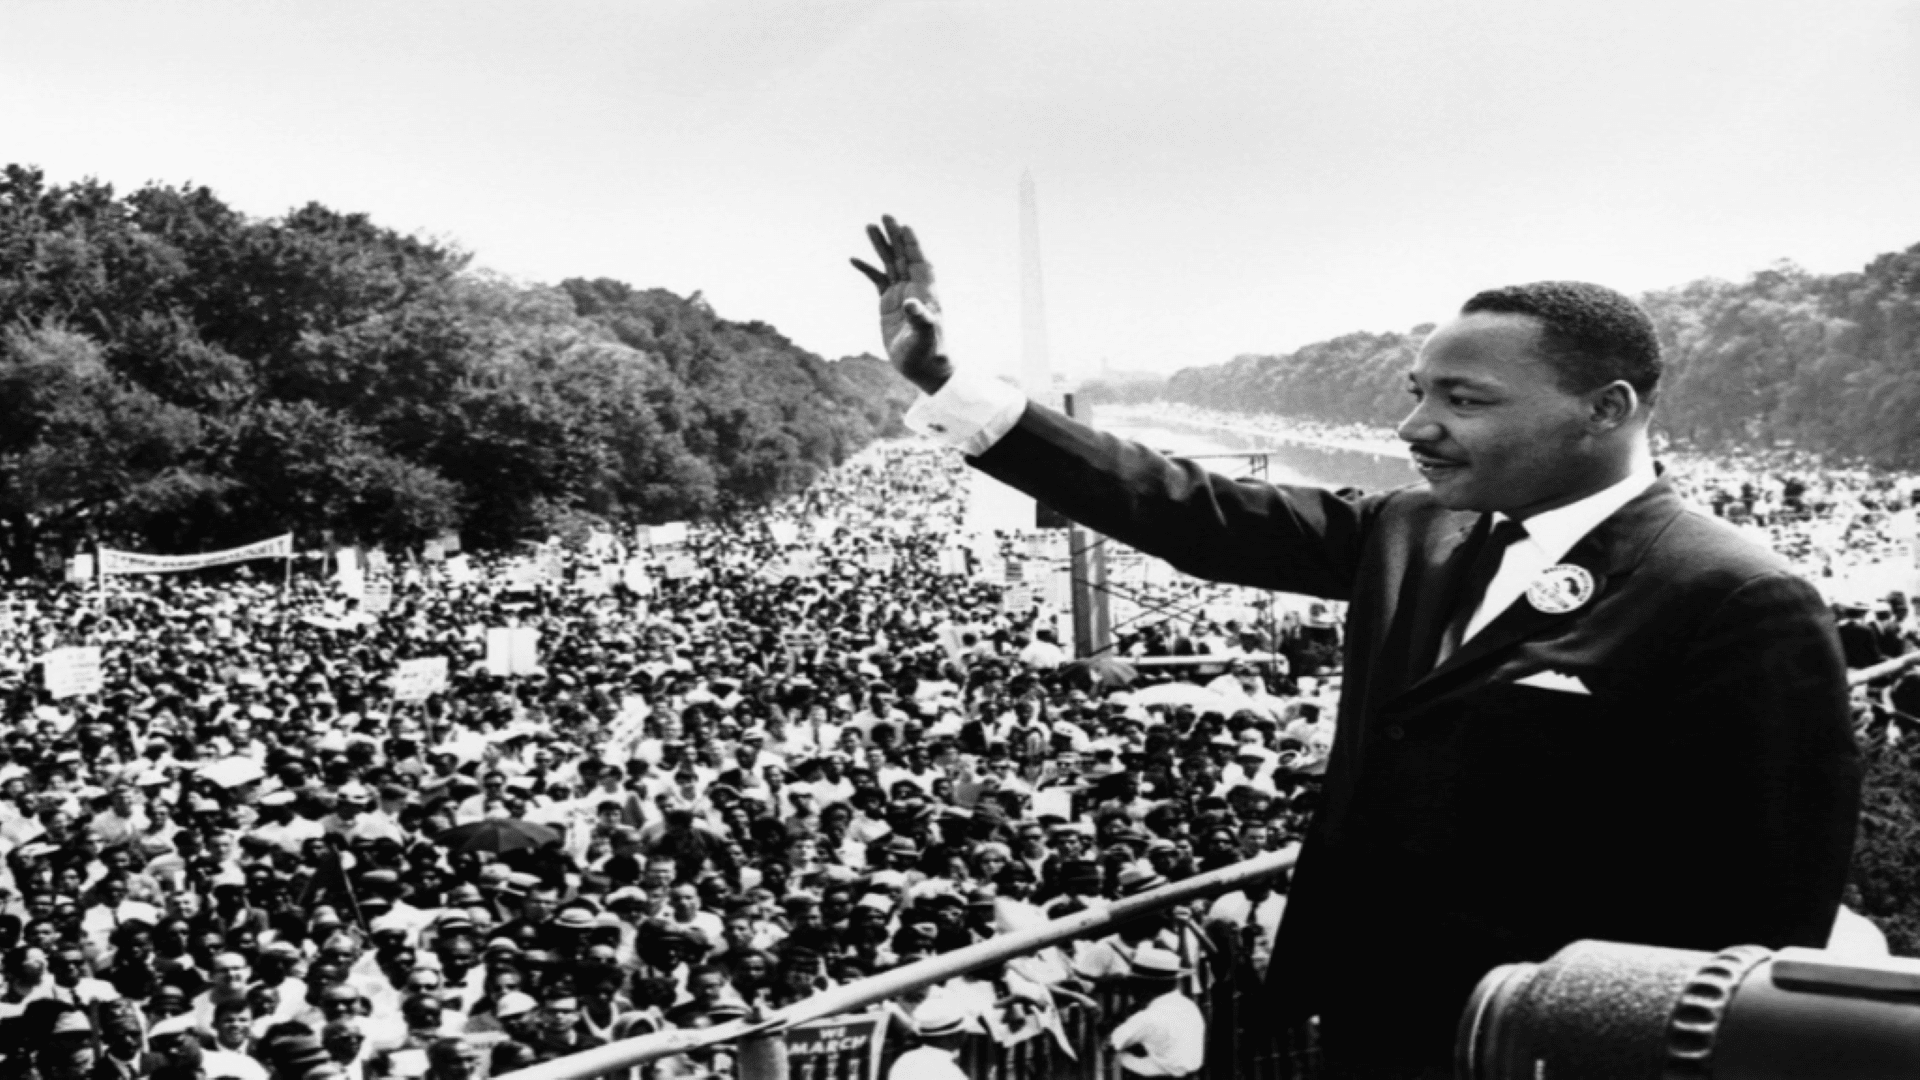 Martin Luther King Jr.’s “I Have a Dream” speech called for the liberty